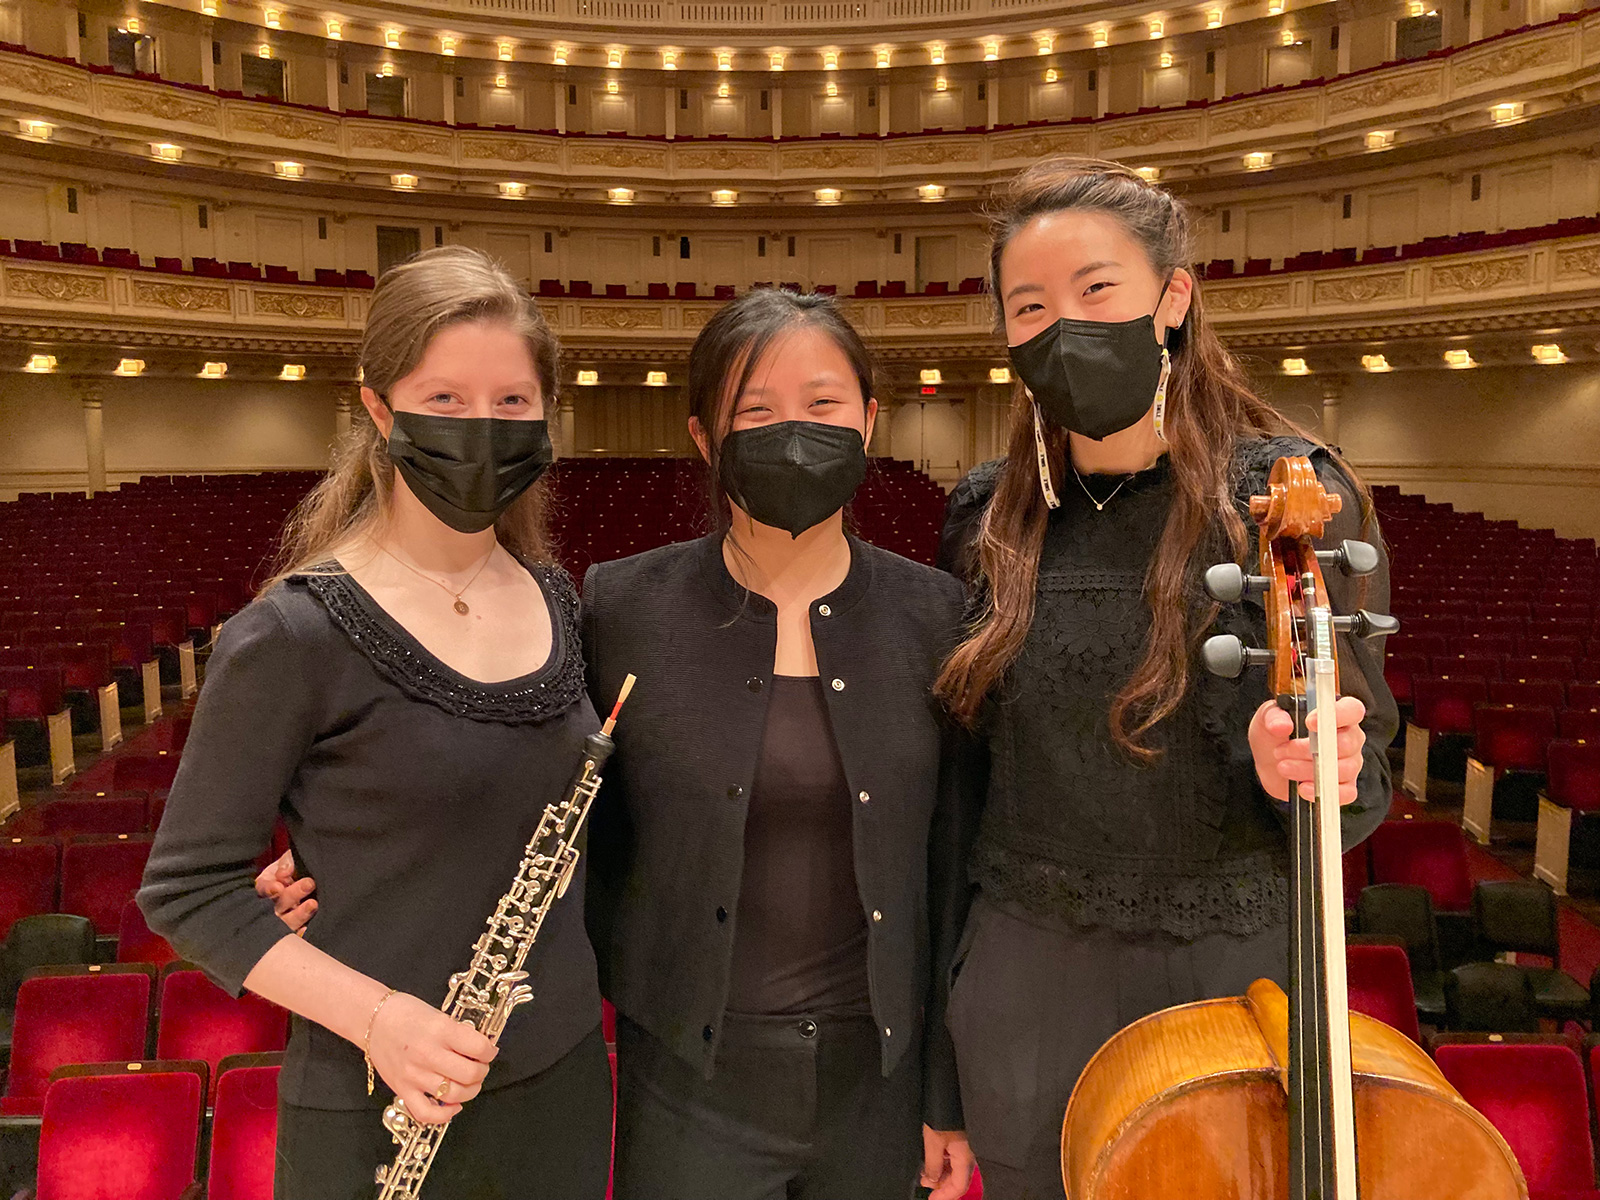 Three women wearing black and masks holding instruments